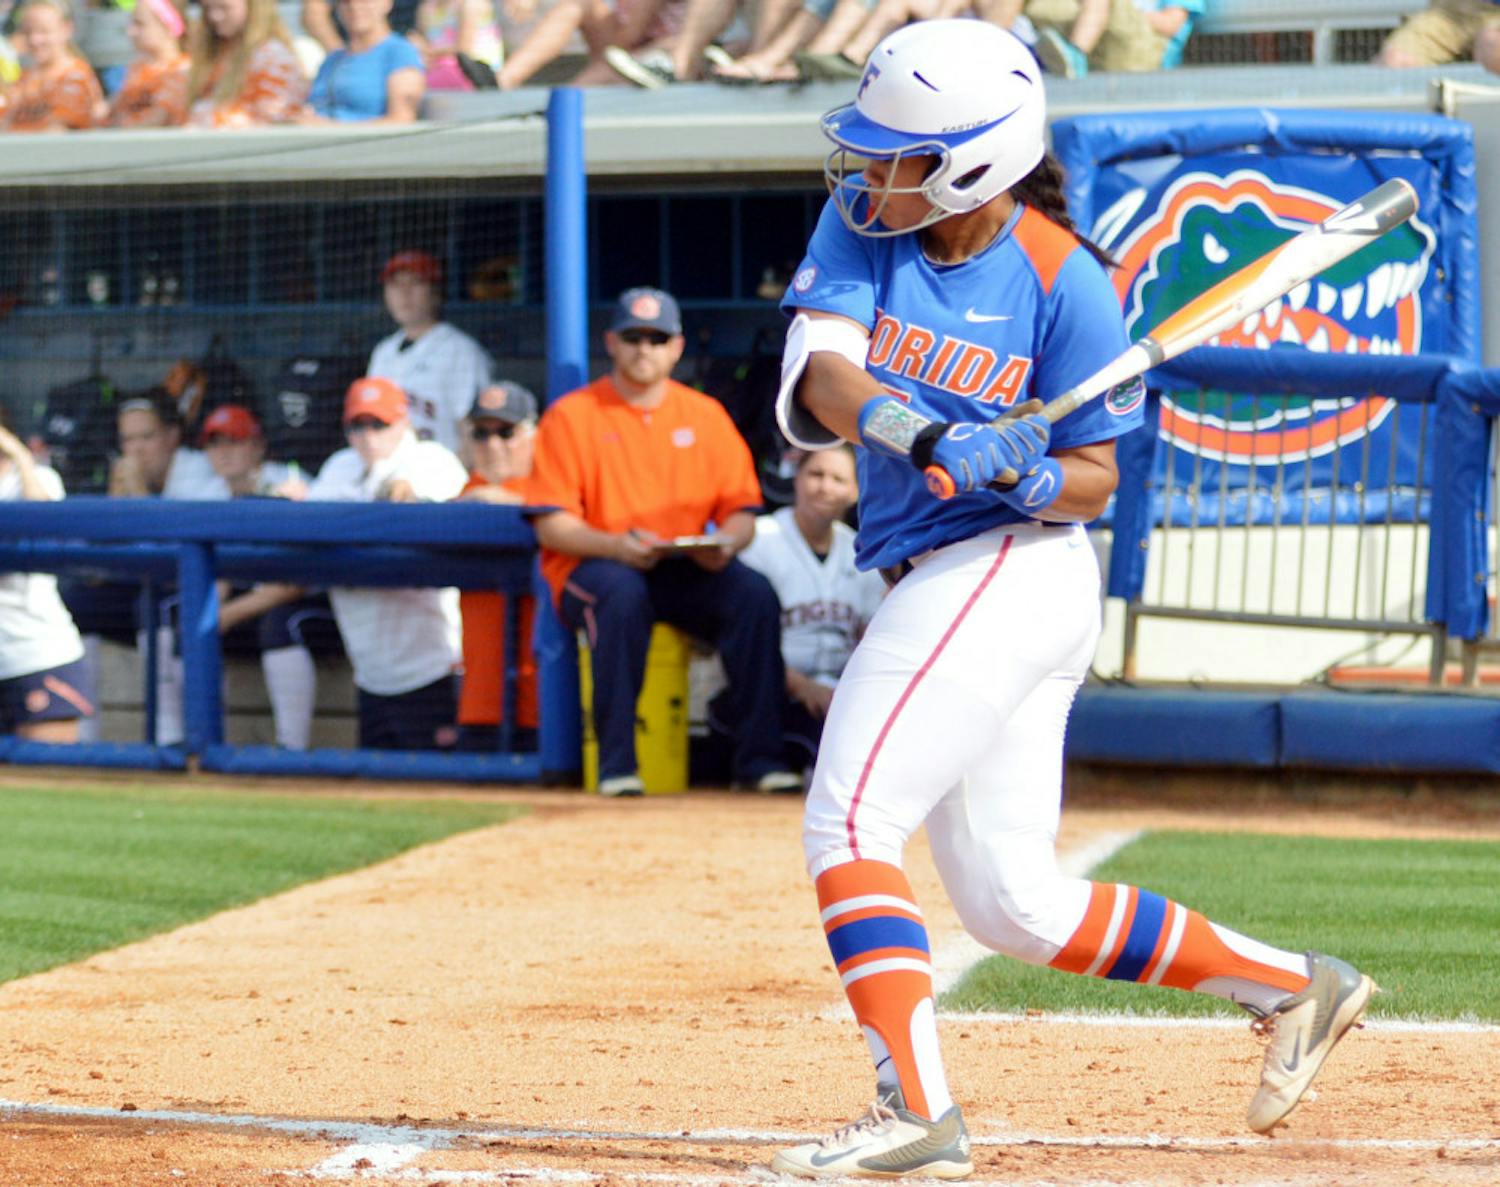 Kelsey Stewart bats during Florida's 7-6 win against Auburn on April 5 at Katie Seashole Pressly Stadium. Stewart finished her sophomore season with a team-best .438 batting average while setting UF's single-season record for hits (102) and tying her record for stolen bases (36).